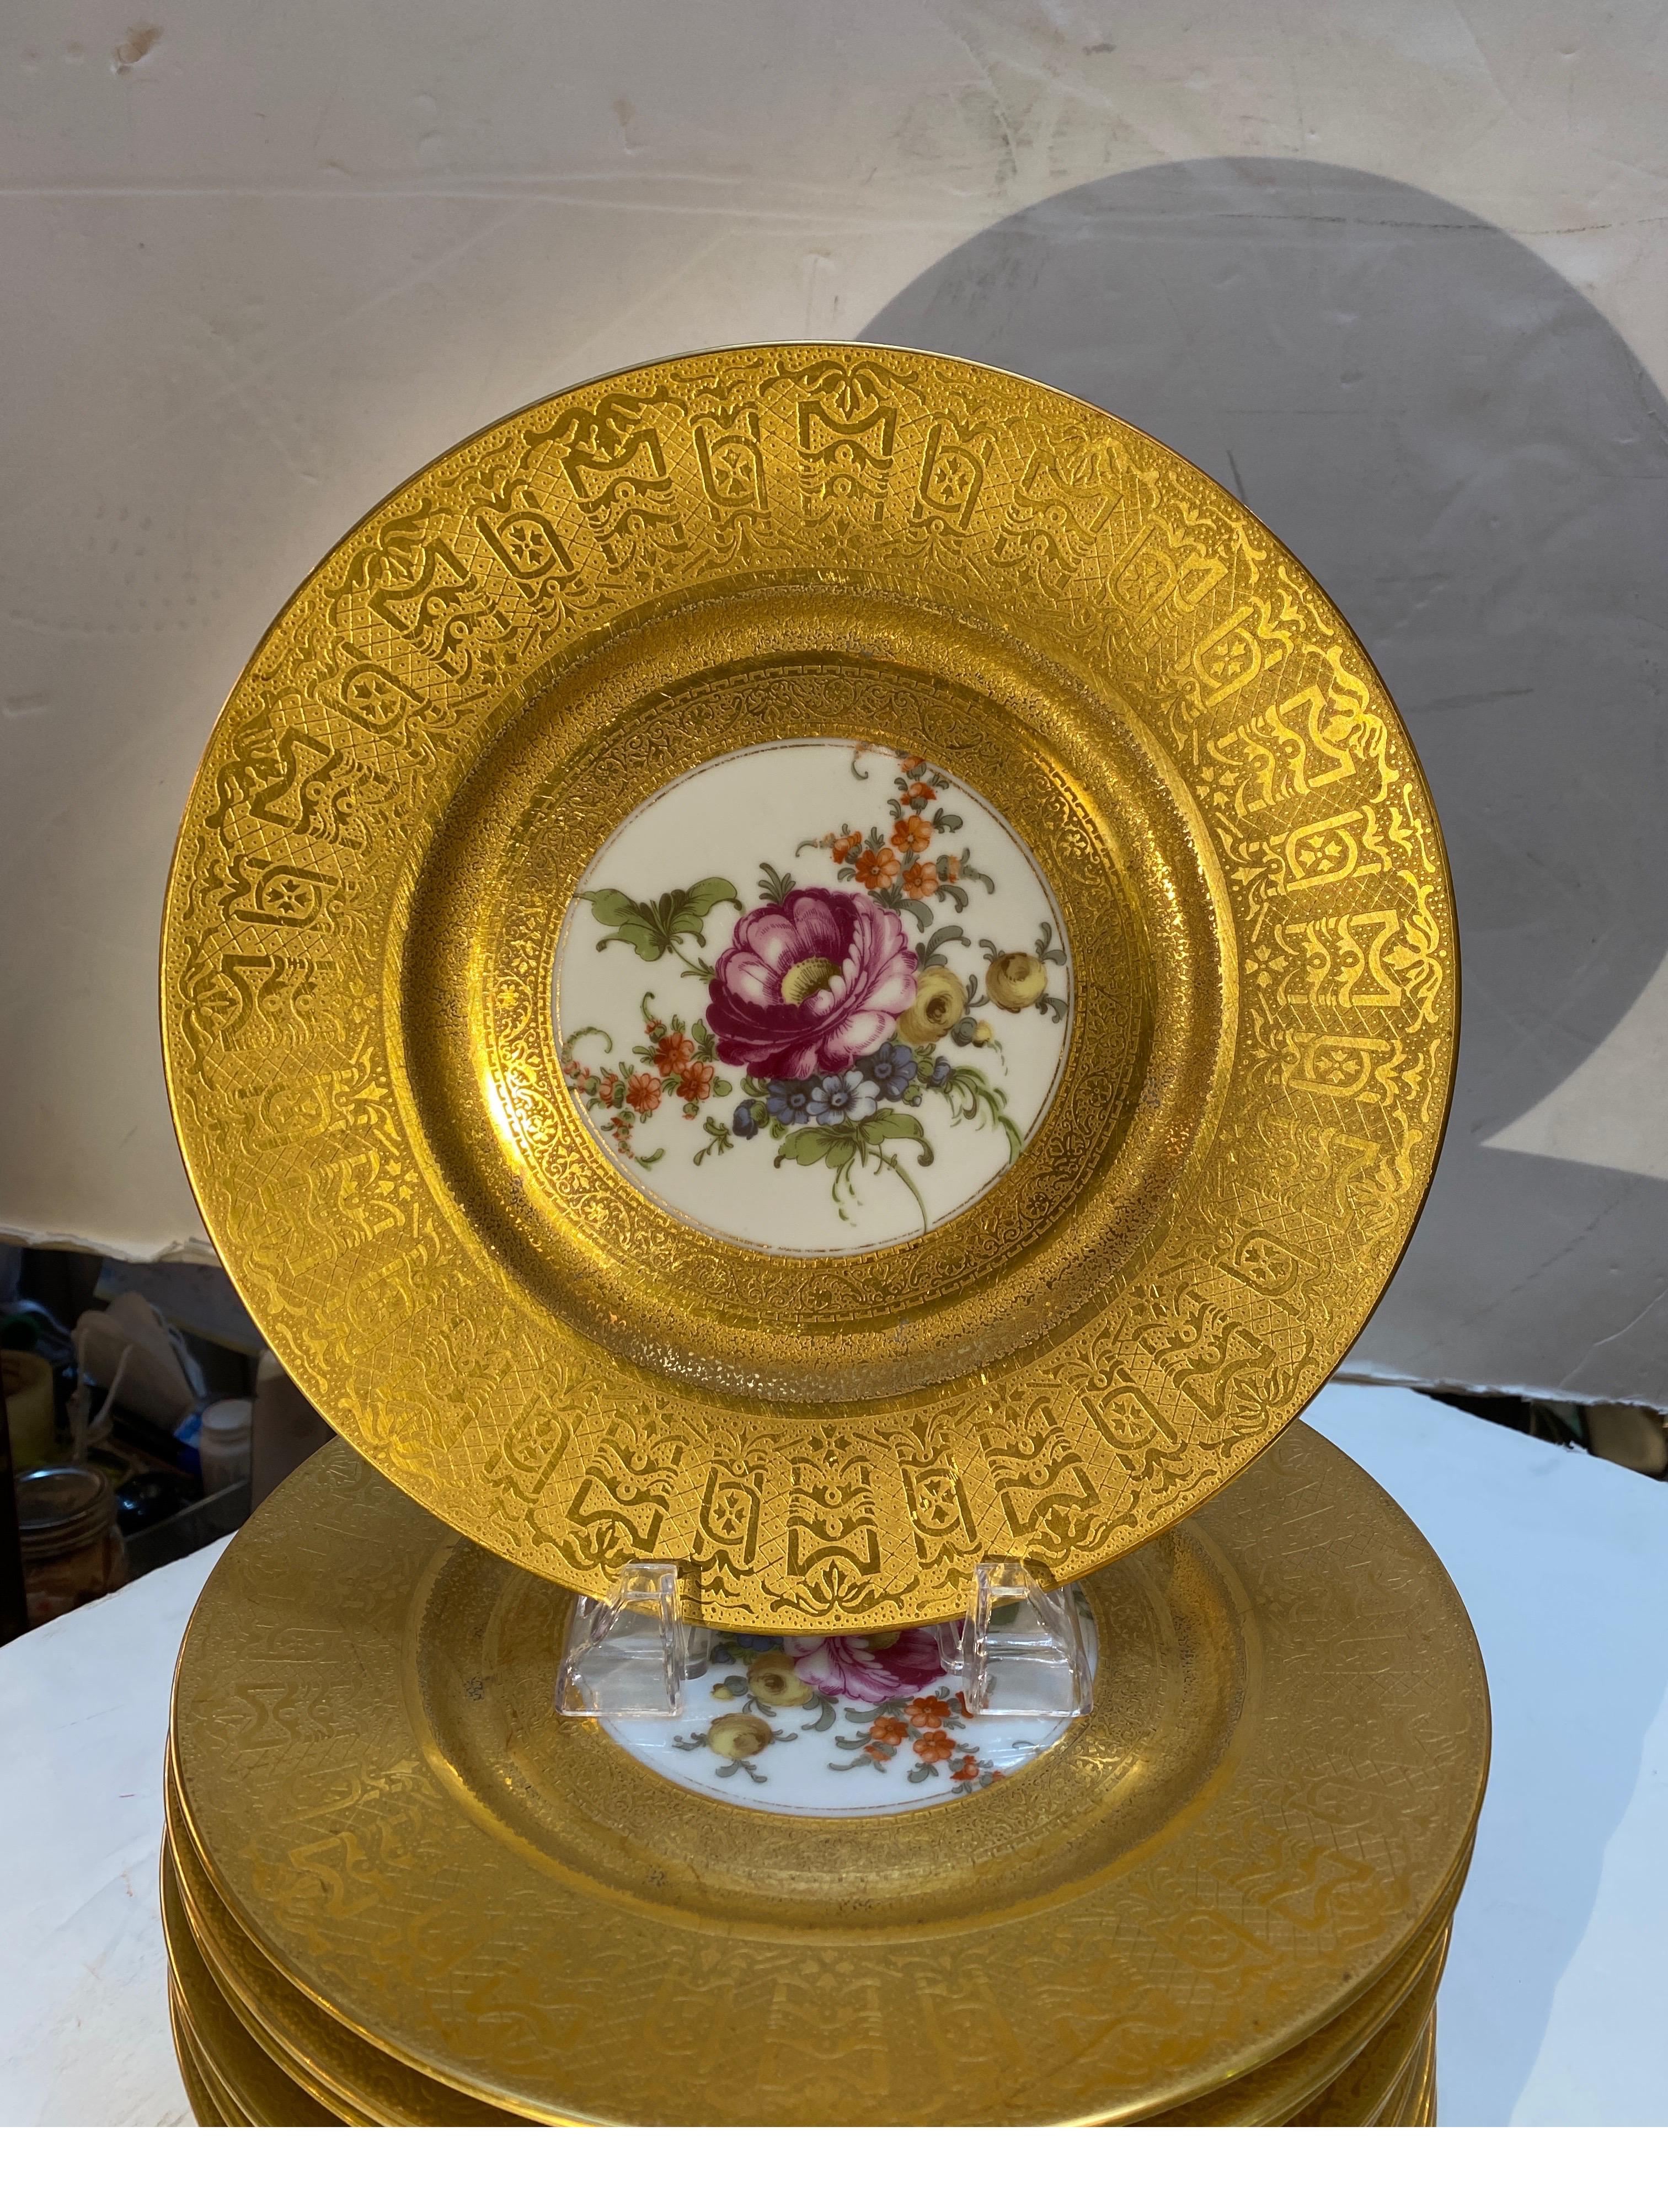 A set of lavish heavy gilt floral service plates by Heinrich and Company, Bavaria. The 10.5 diameter plates with thick textured borders against white porcelain with Dresden floral centers.